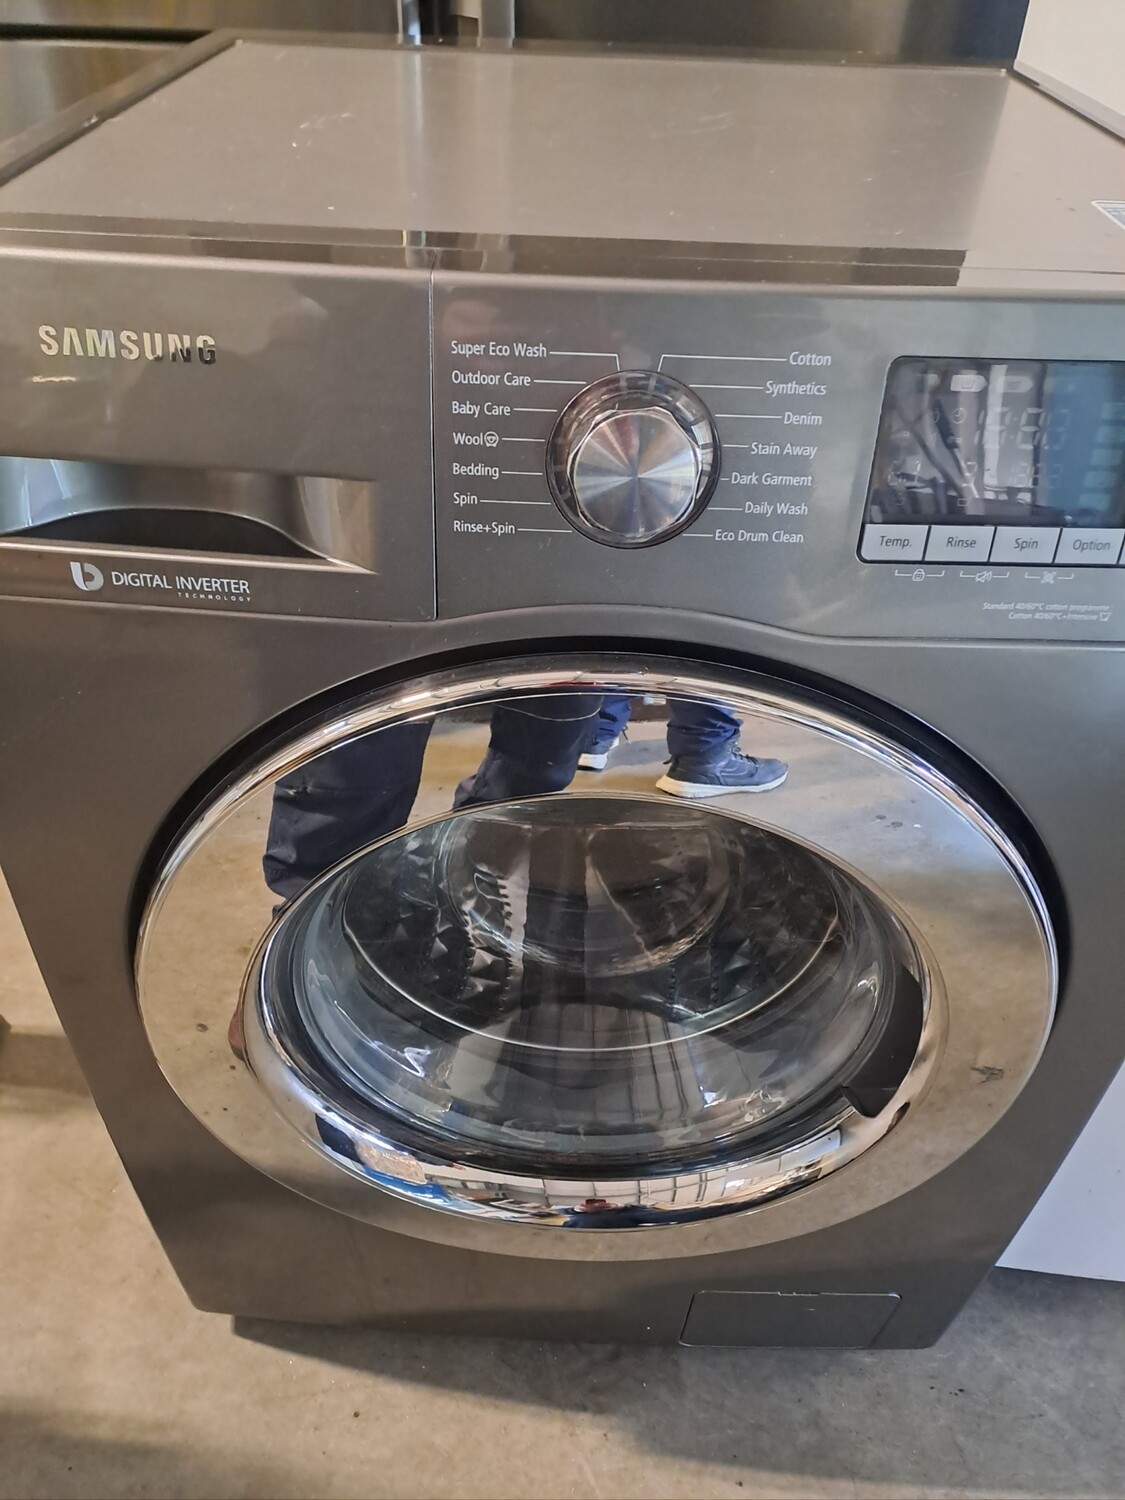 Samsung WF90F5E5U4X/EU 9kg Load, 1400 Spin Washing Machine - Graphite Grey - Refurbished - 6 Month Guarantee. This item is located in our Whitby Road Shop 